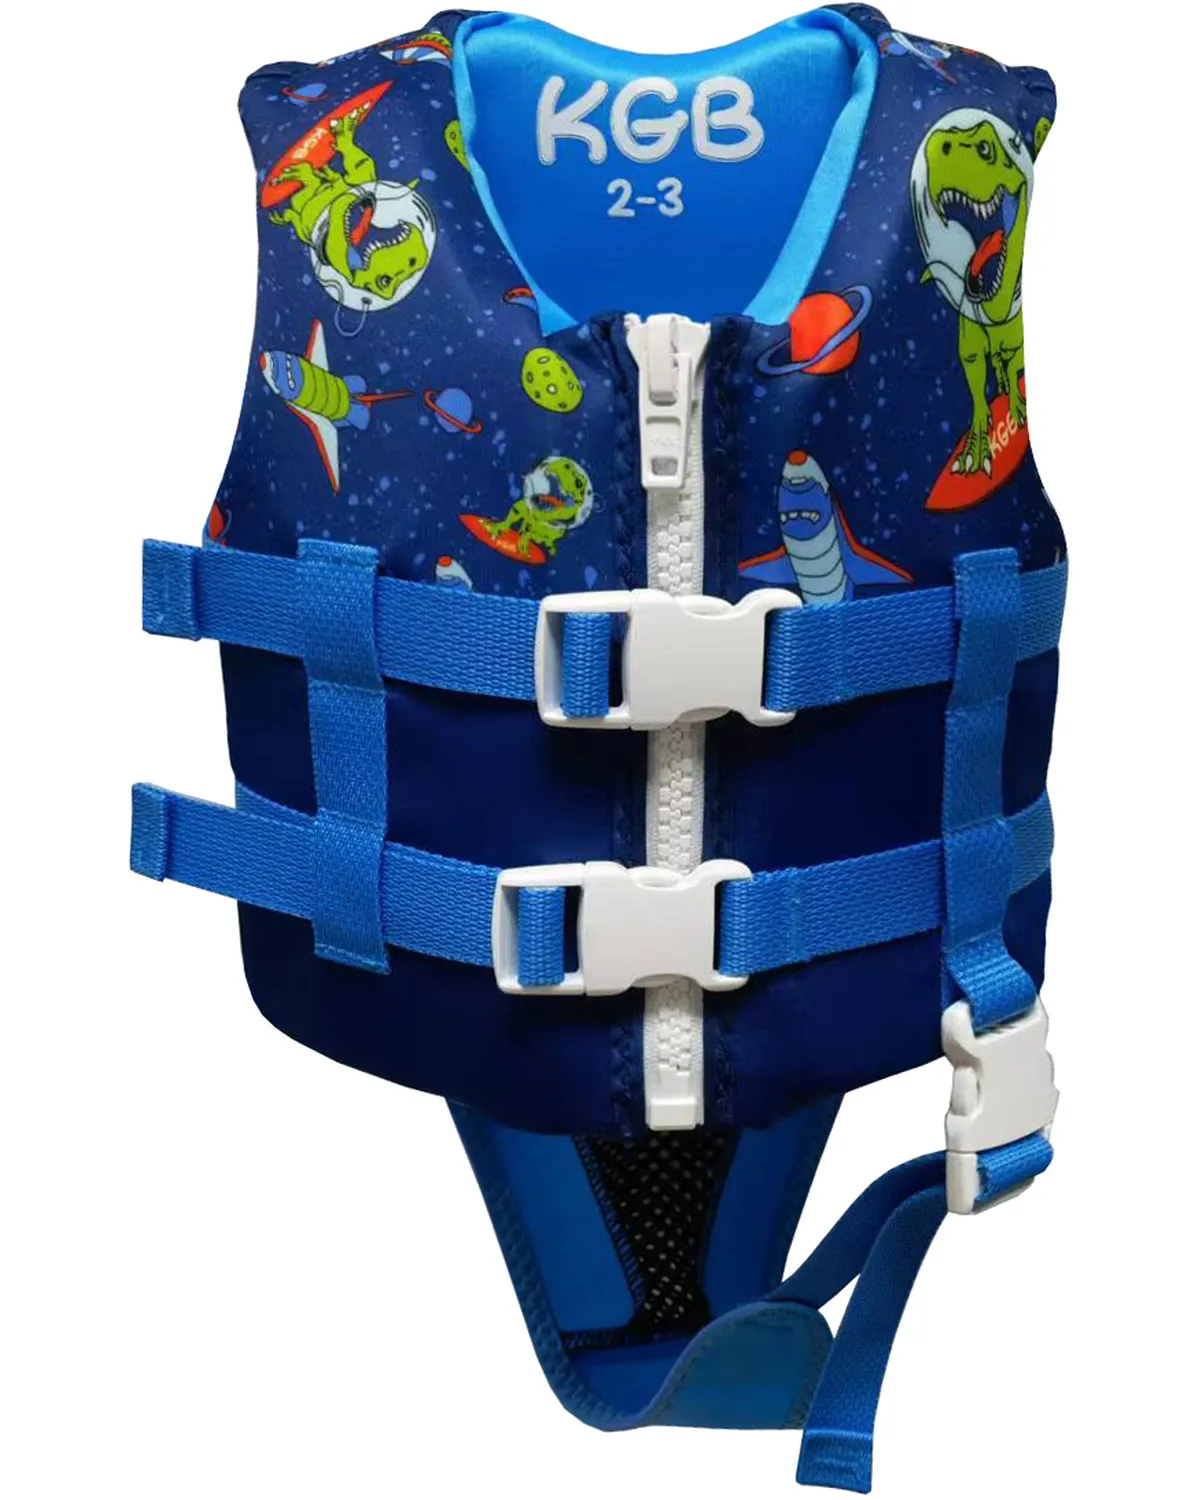 KGB Boys Life Jacket - Out of Space